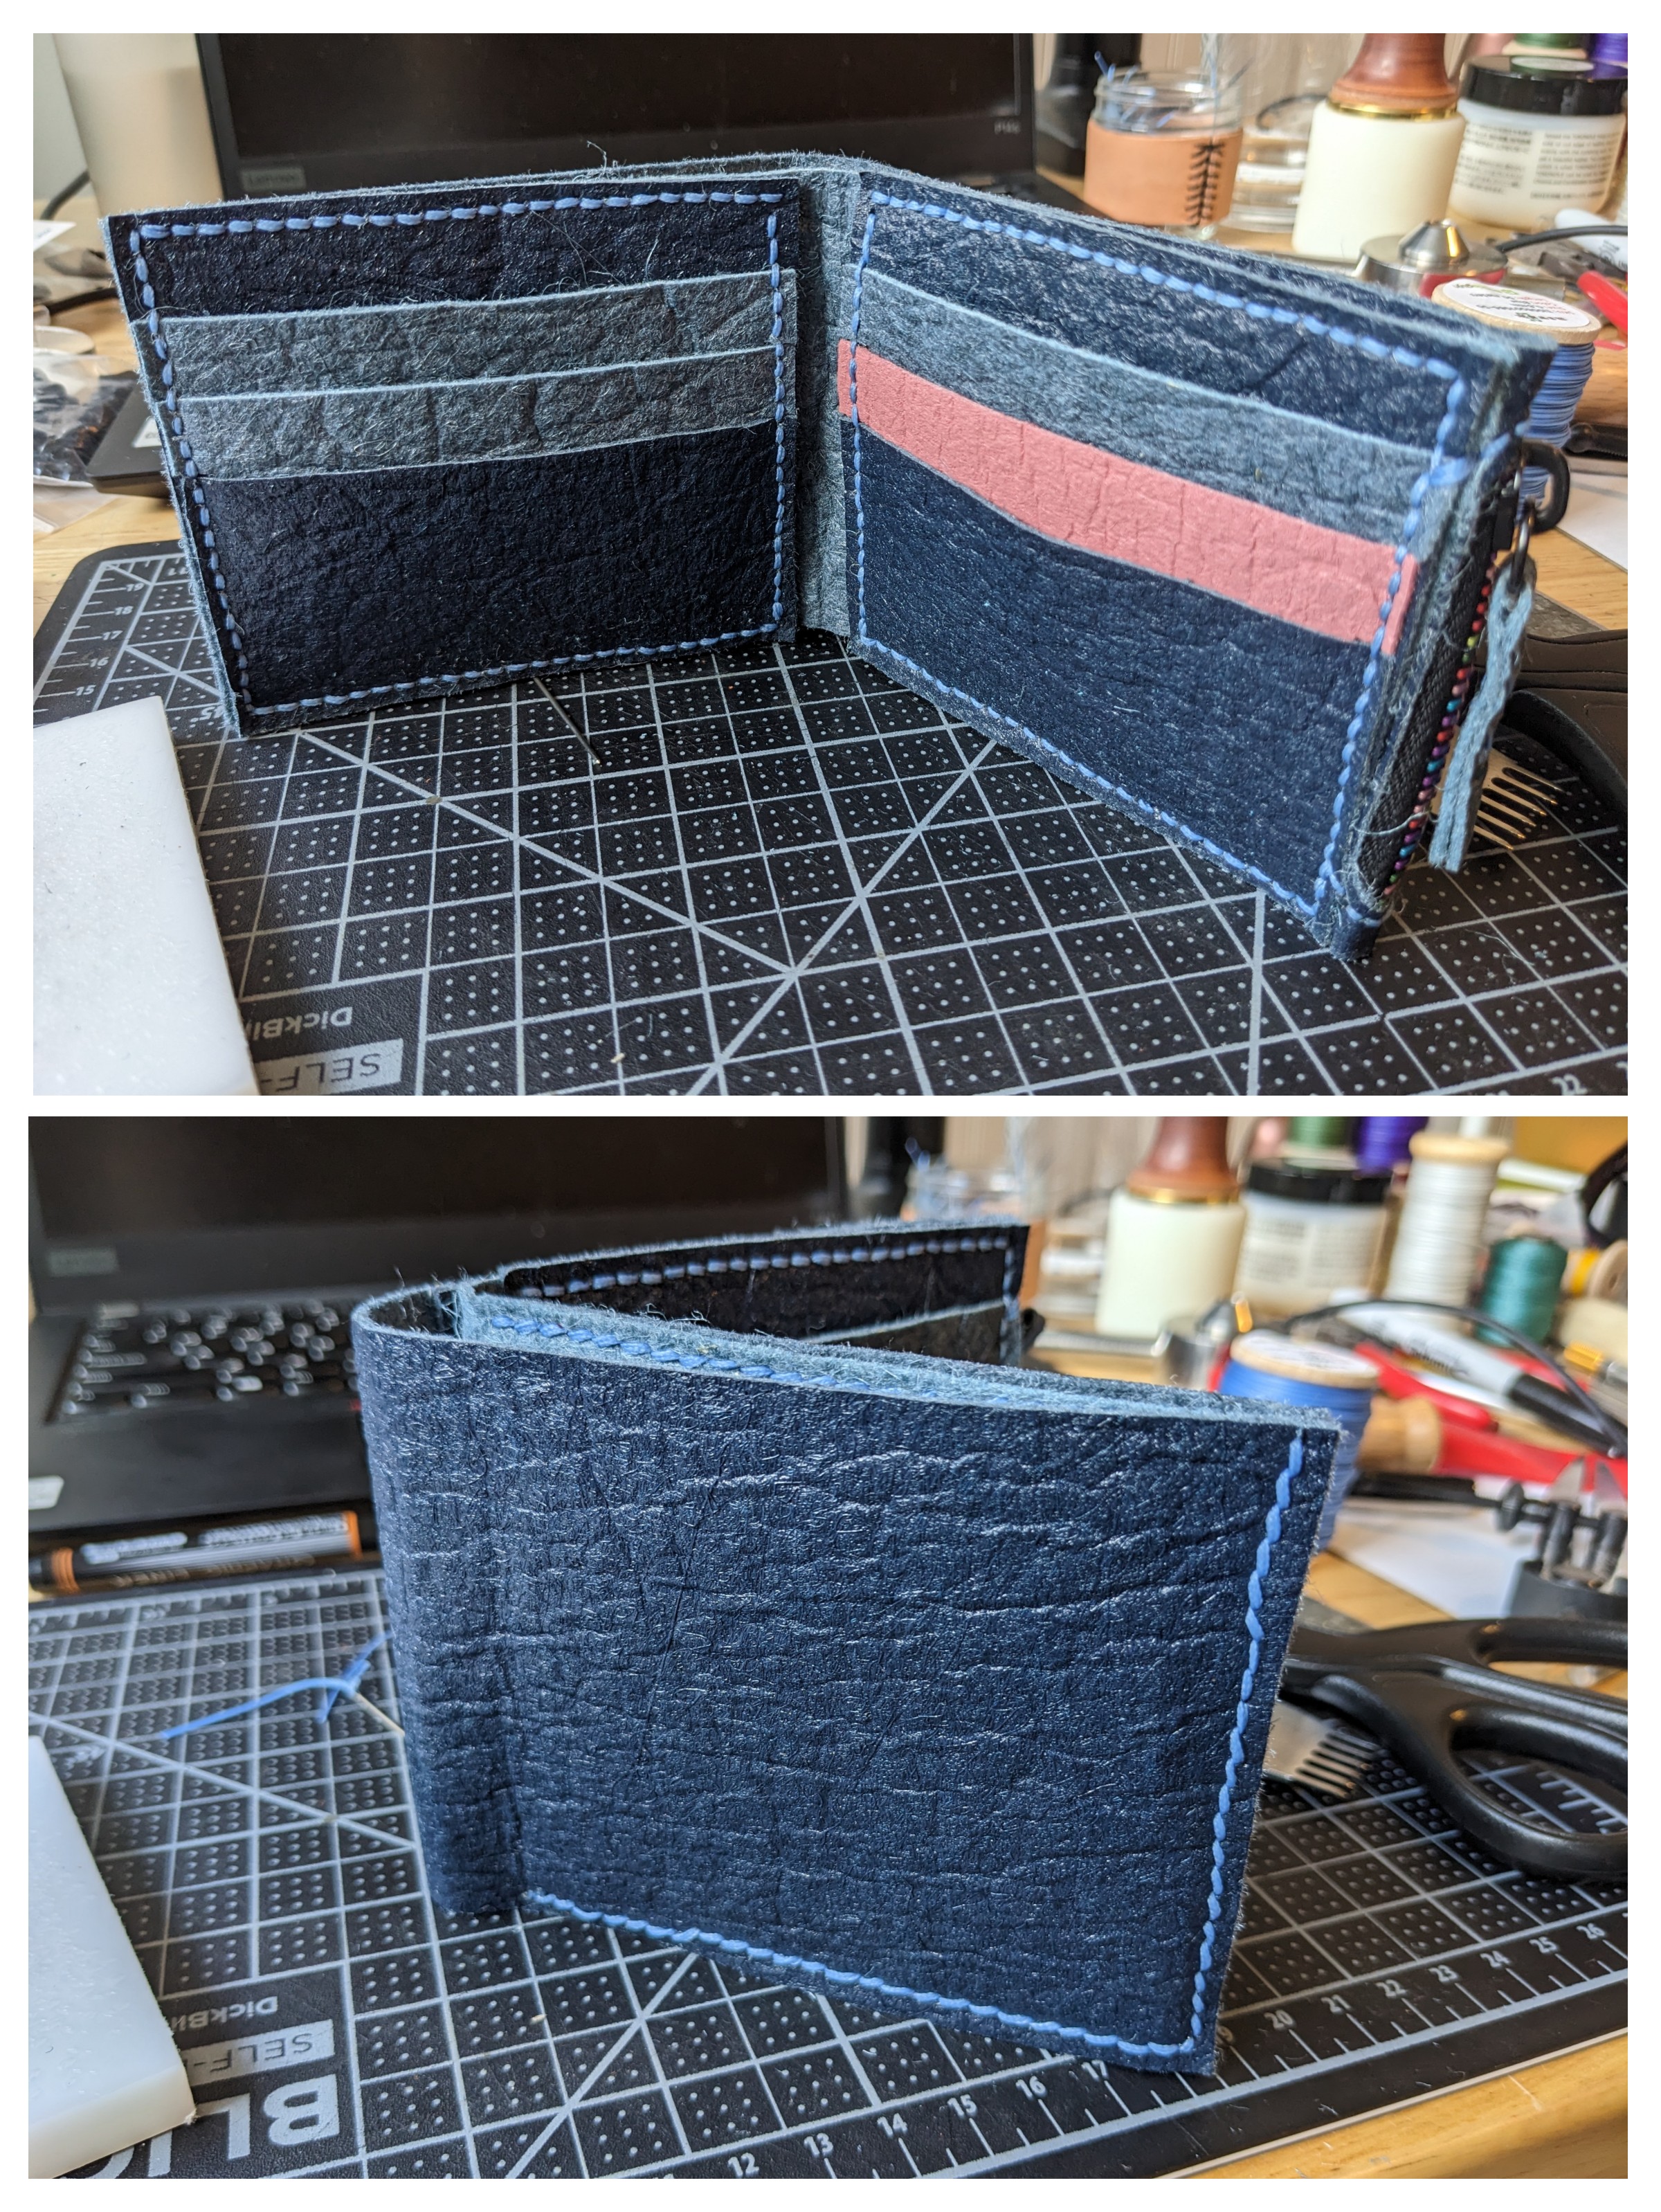 A two-picture collage showing the inside and outside of a wallet made with piñatex, a leather alternative made from pineapple leaves. It is two tone blue with a pink accent and has a zippered pocket built in.